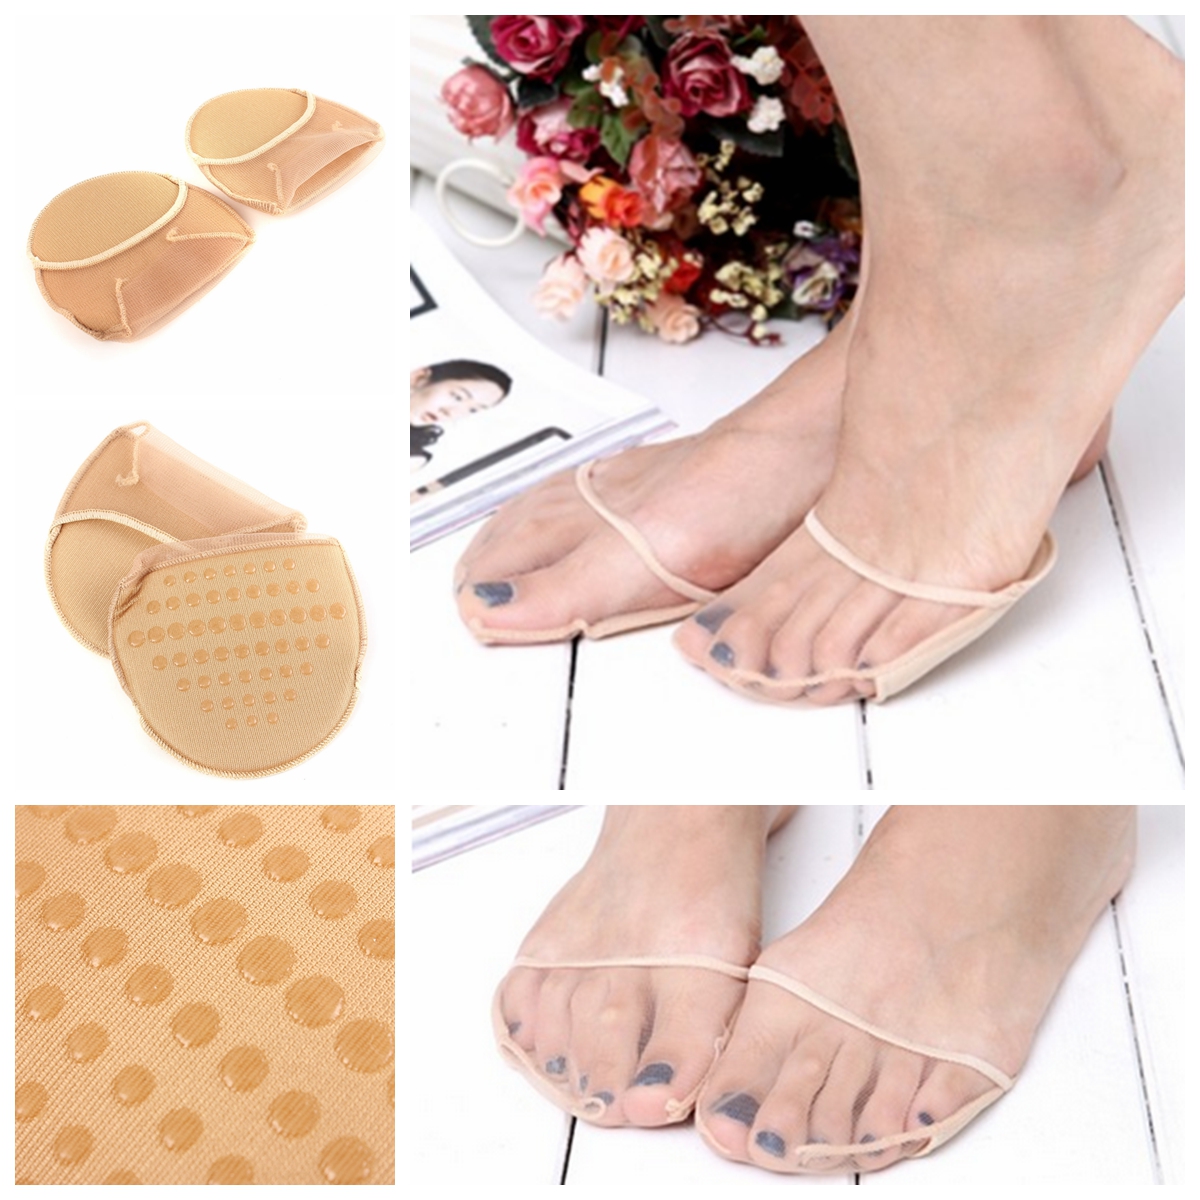 2-Cushion-Pads-Footful-Ball-of-Foot-Insoles-Gel-Pads-Cushion-Metatarsal-Sore-Forefoot-Support-1242142